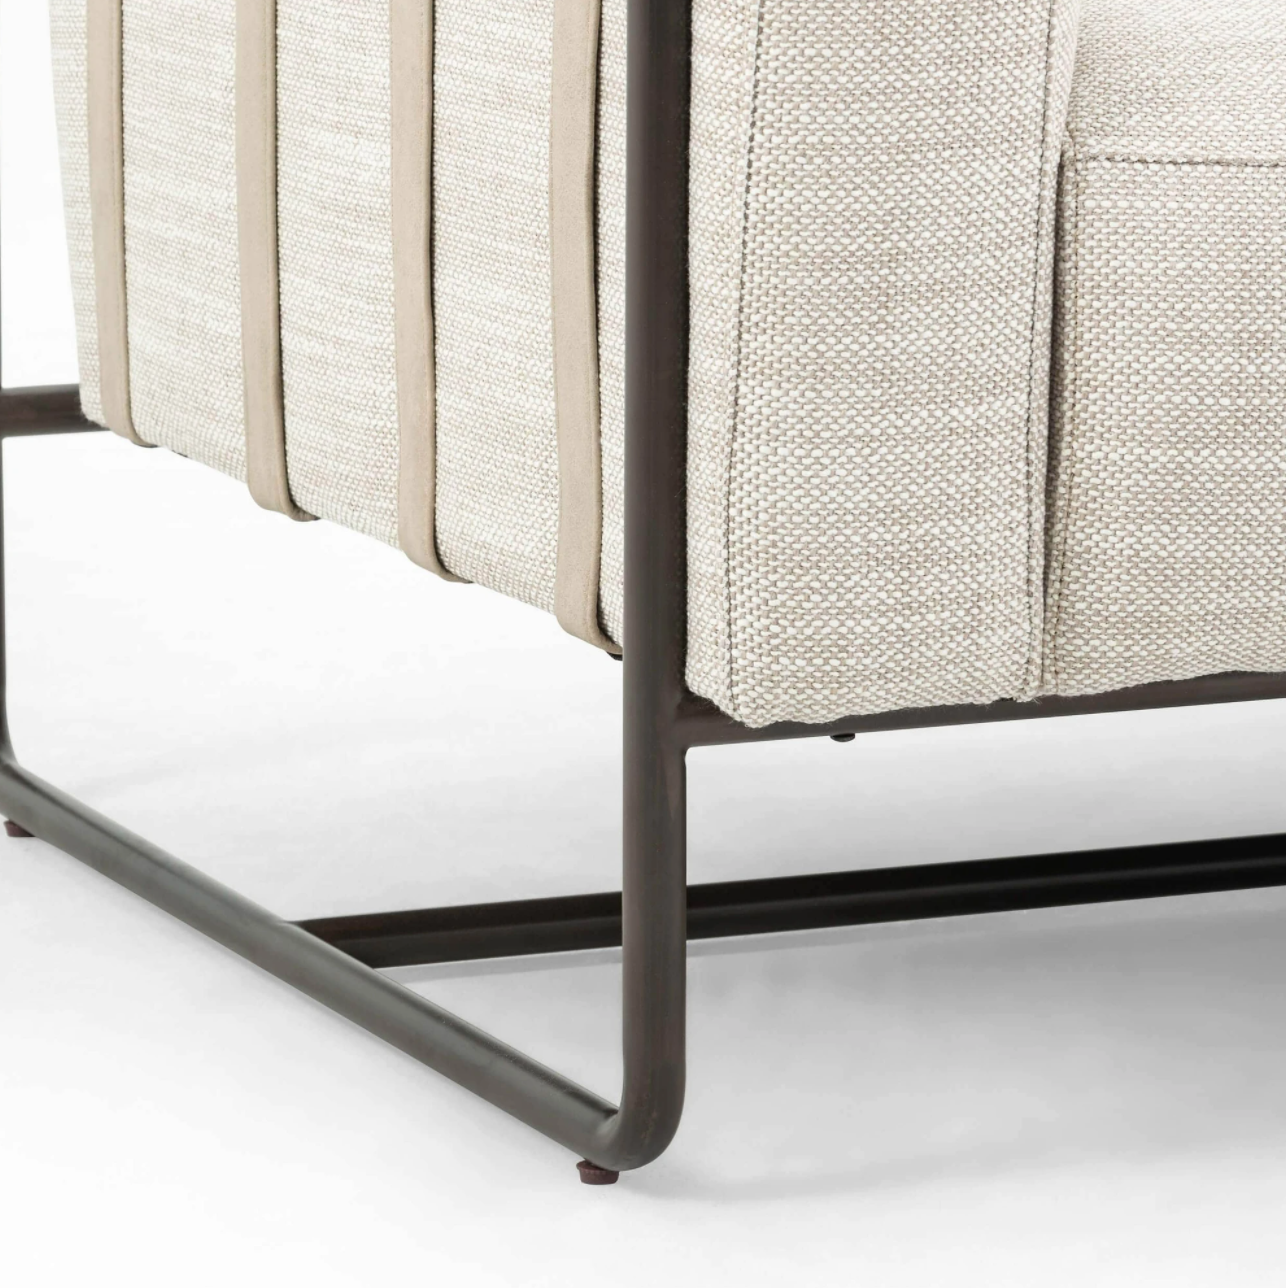 SHOP MY PICK: This leather strap suspended sofa is about as unique as they come. It features a black iron base, leather straps, rubberwood paneling, and beautiful taupe colored upholstered seating that appears to be floating.